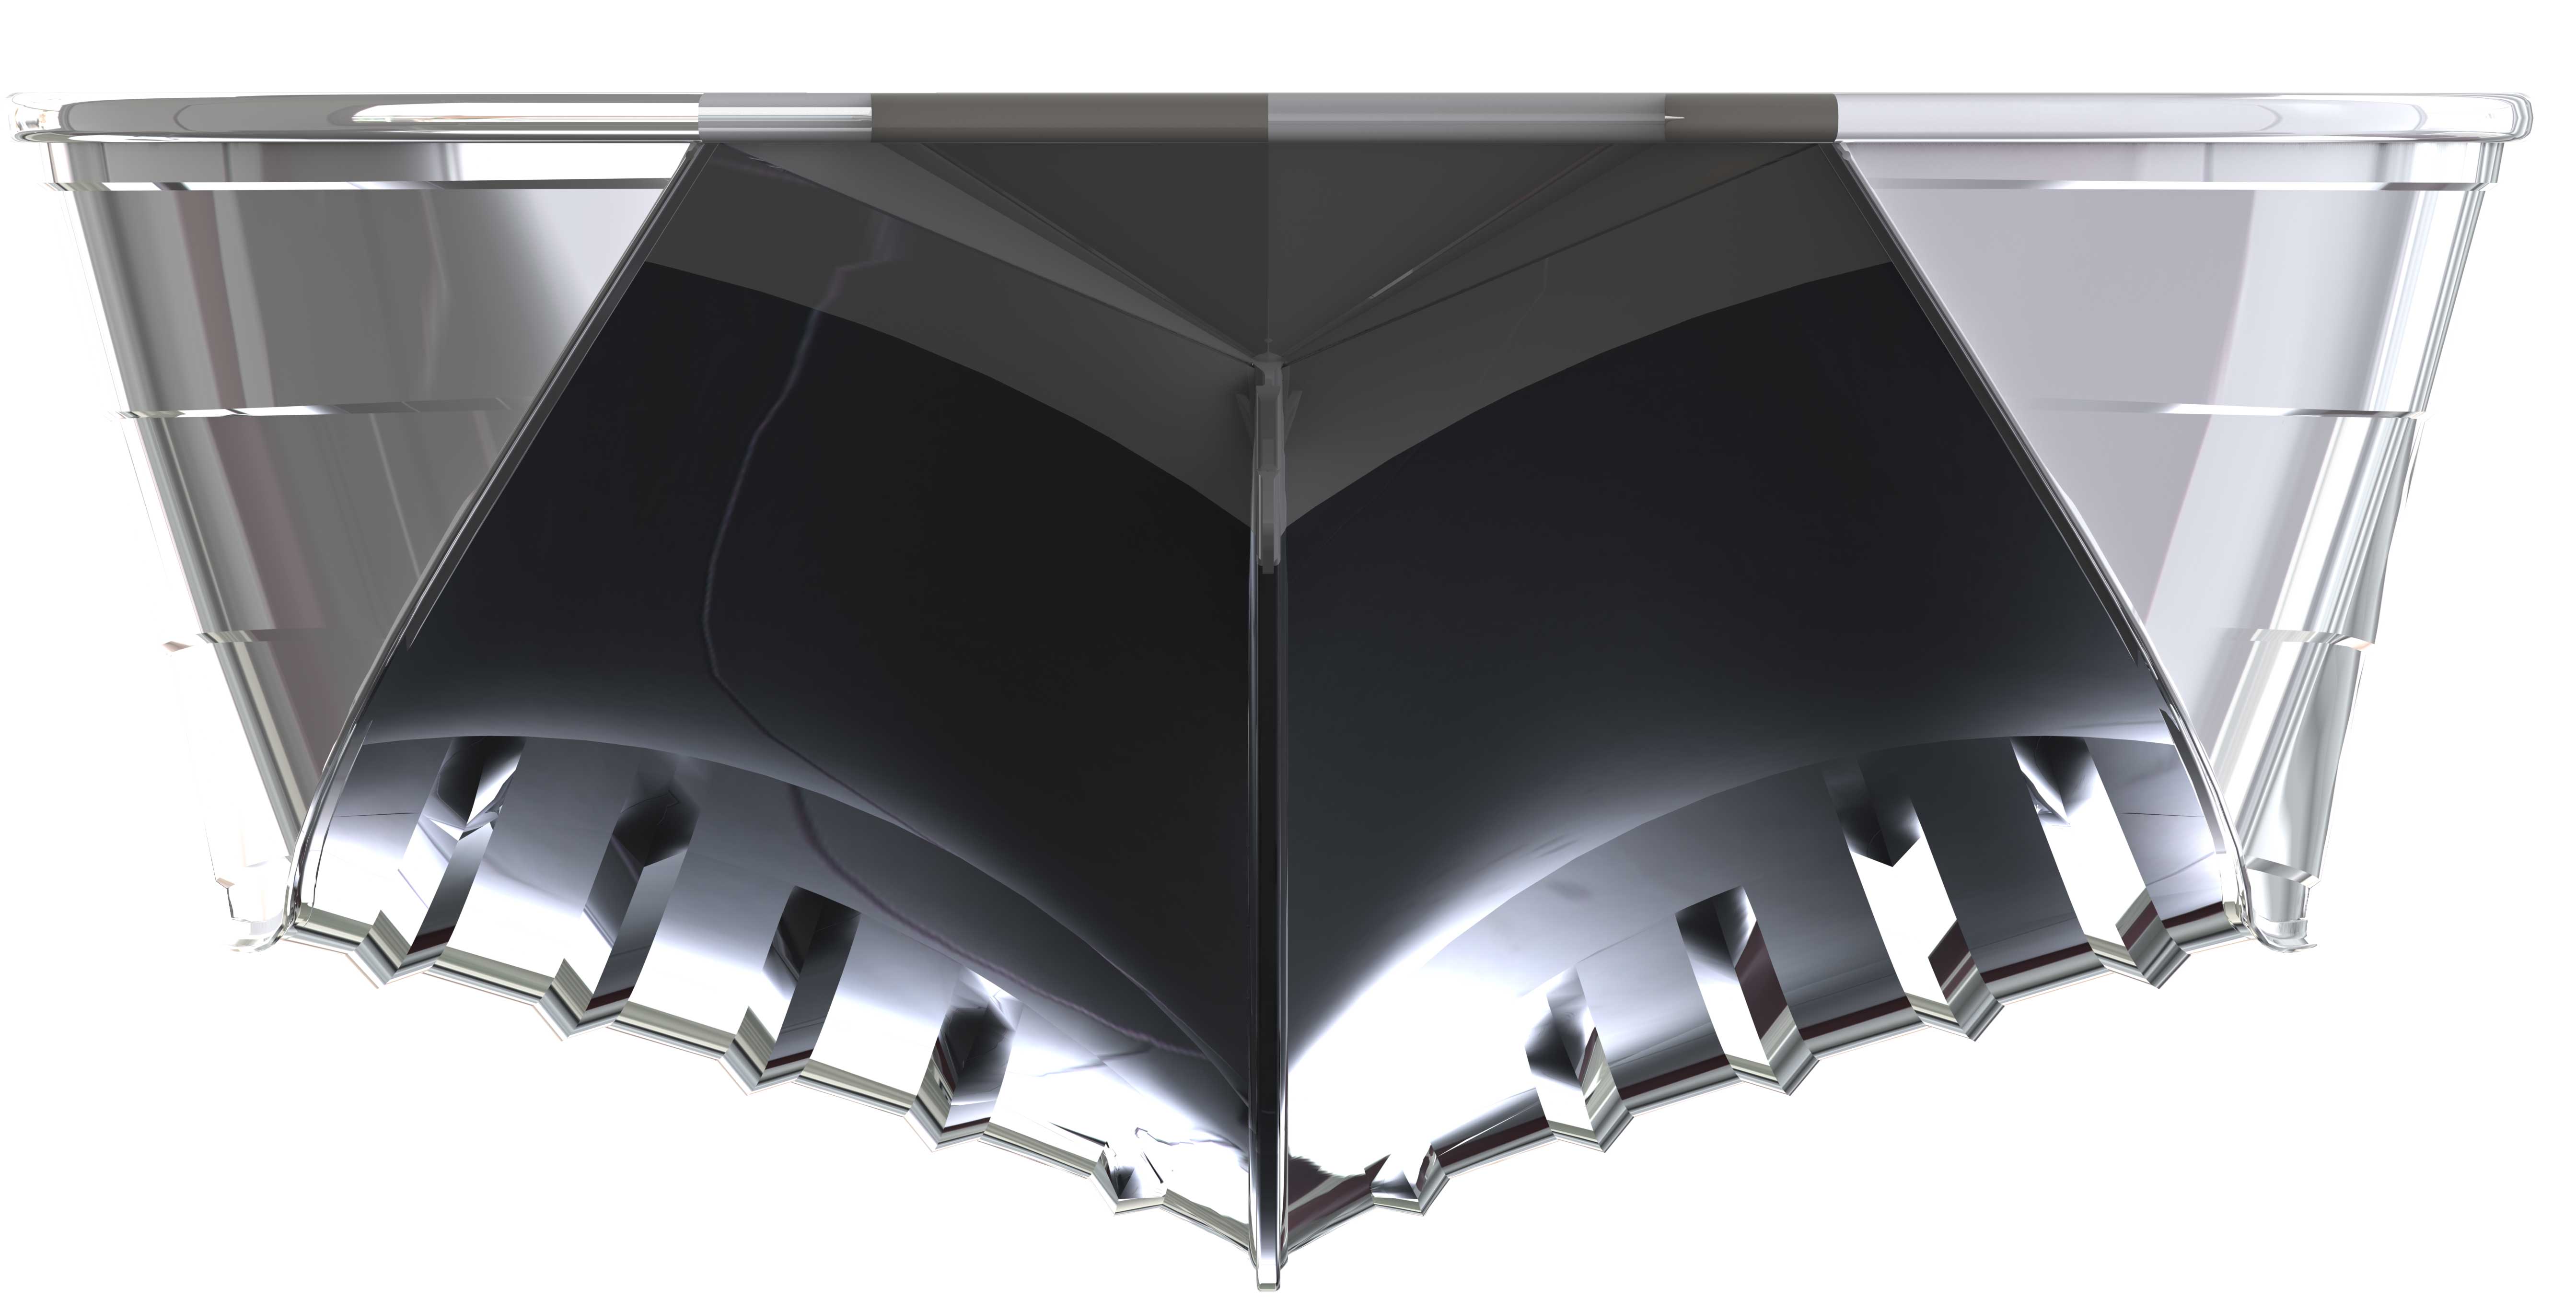 The peak of boating is here with the release of Quintrex’s new Apex Hull